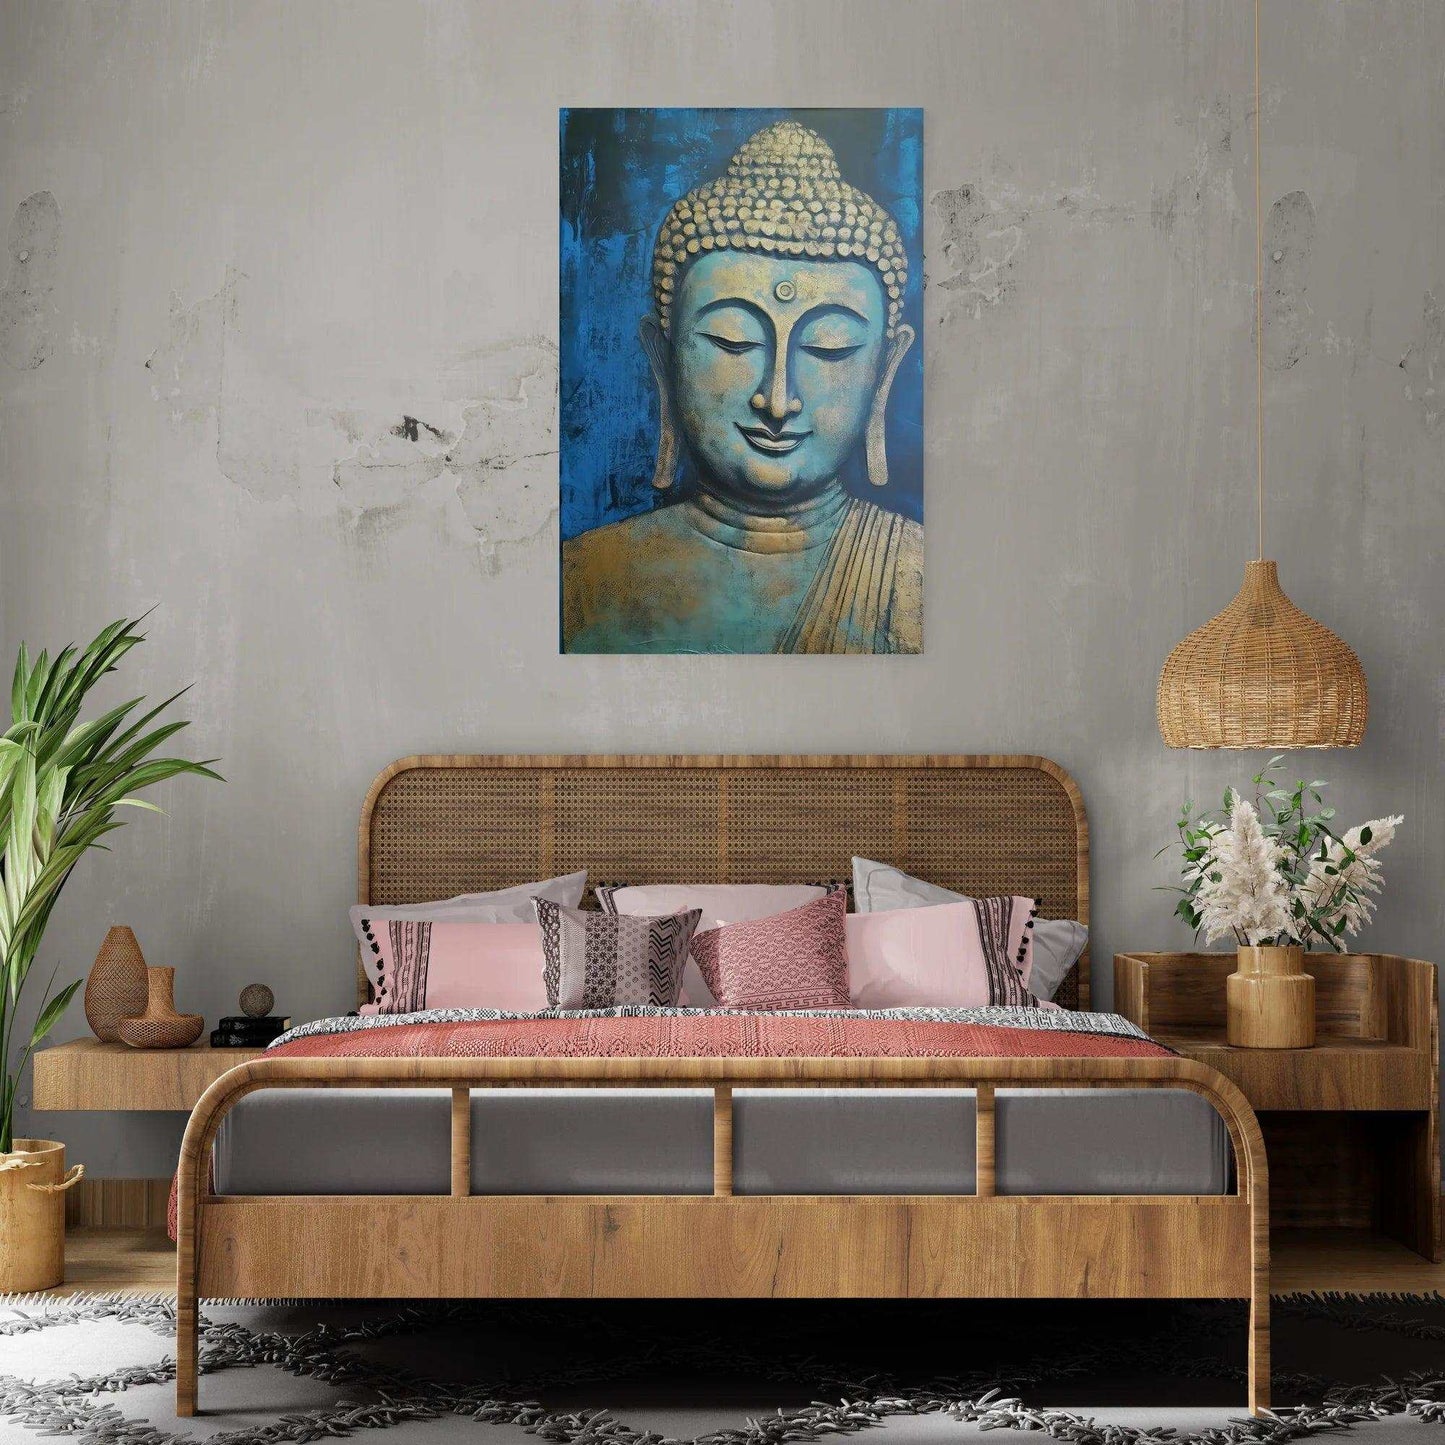 A serene Buddha painting in blue and gold hues is mounted above a wicker headboard, complementing the calm and modern aesthetic of the bedroom, which features neutral bedding, pink accent pillows, and a wicker pendant light.